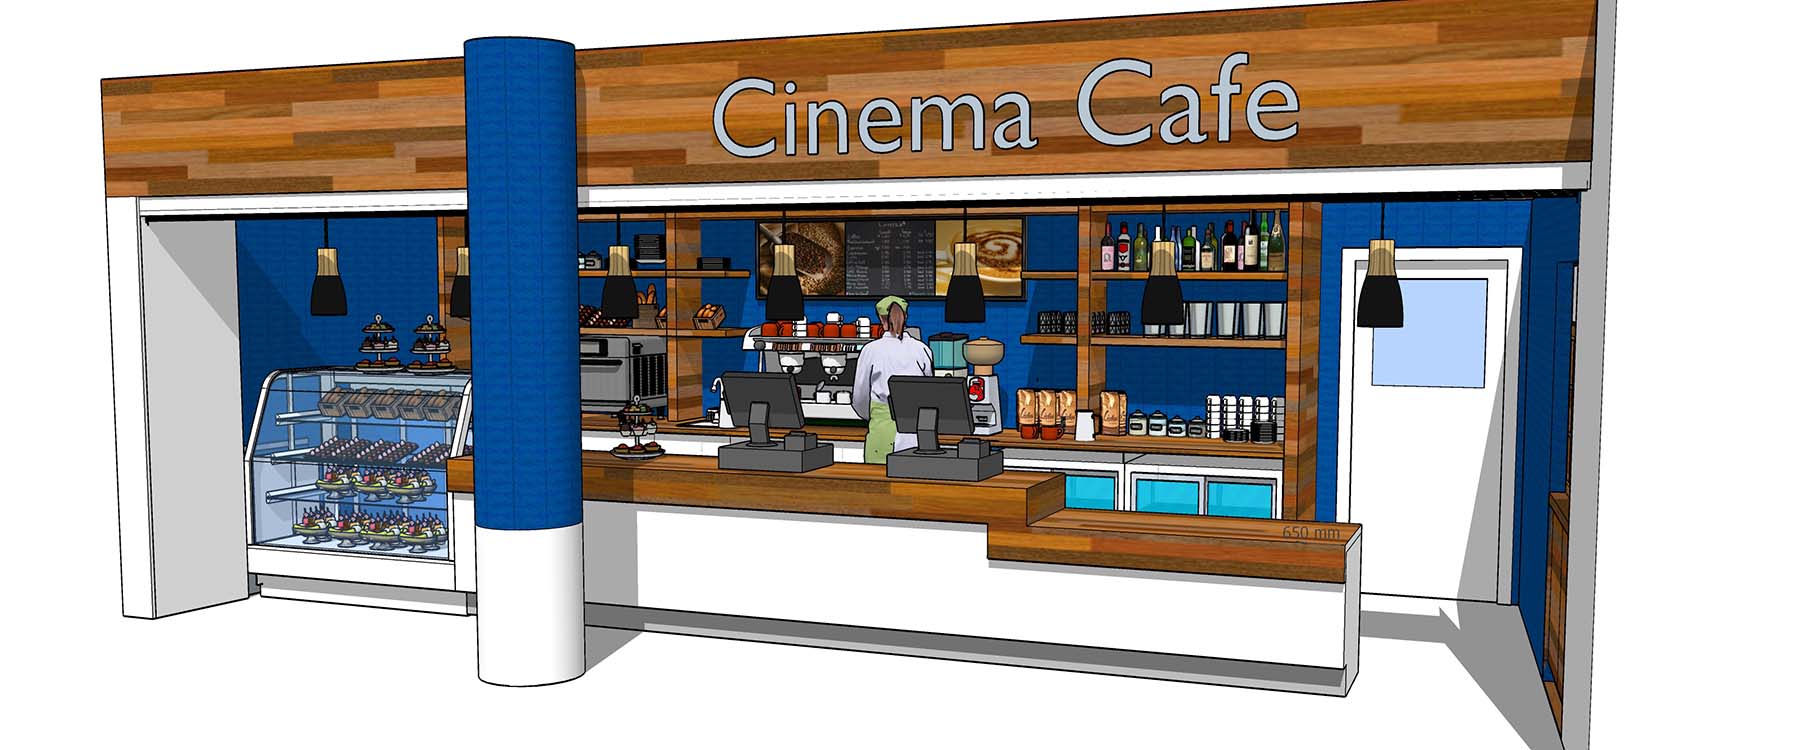 An illustrated sketch shows the coffee shop counter and serving area.